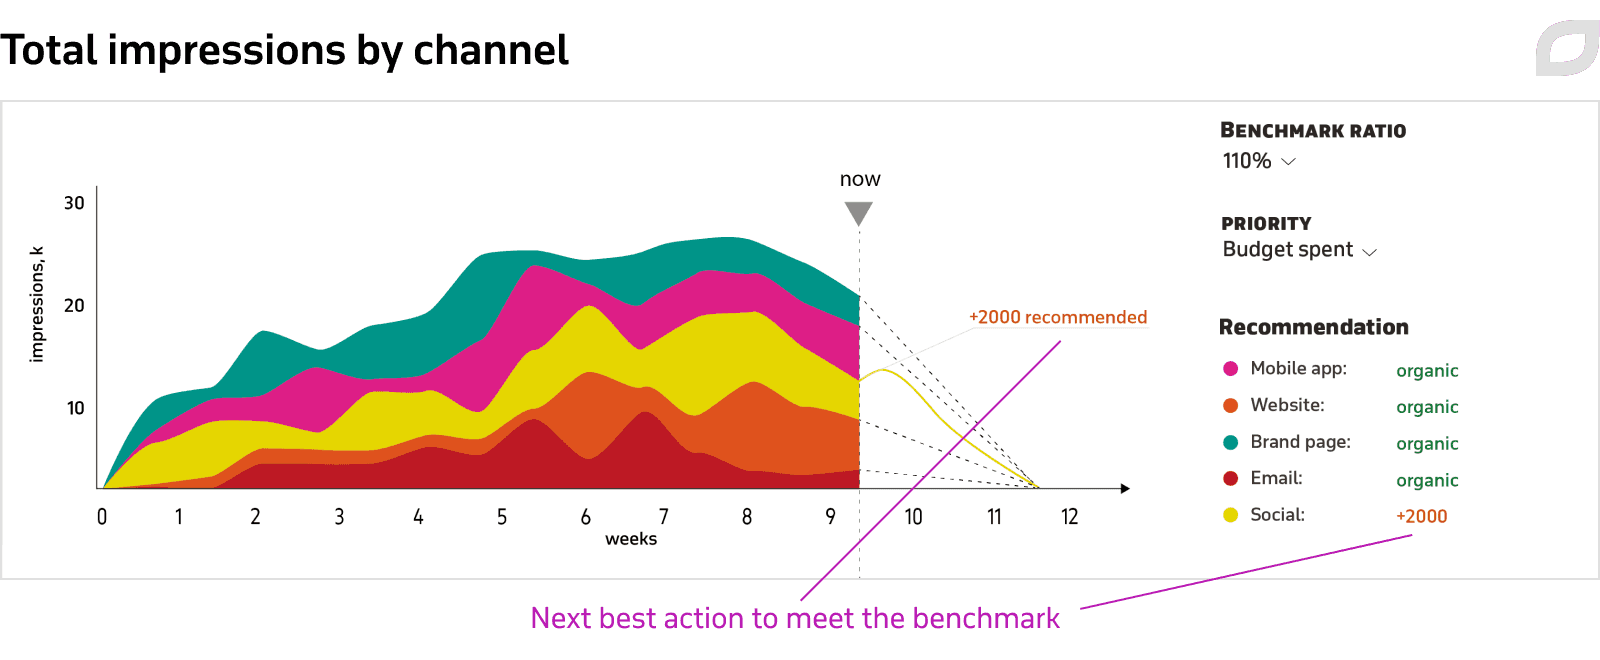 Total impressions by channel